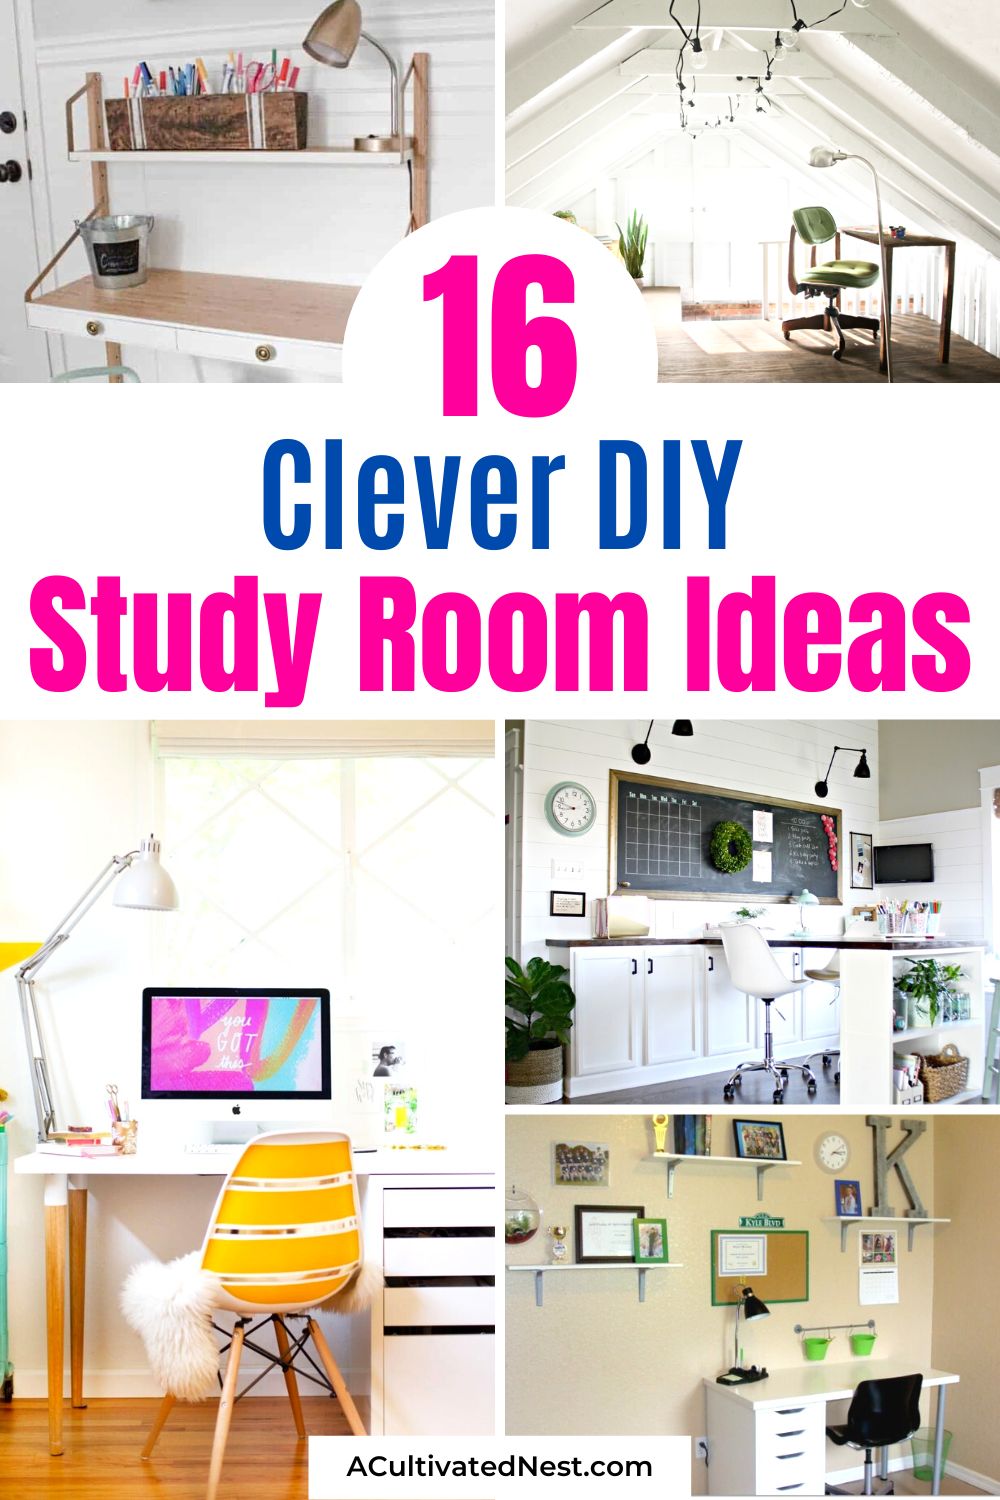 16 Clever DIY Study Room Ideas- Study smarter, not harder! Explore 16 brilliant DIY study room ideas that will elevate your kids' productivity in style. Discover organization hacks, decor inspiration, and more to create a study space that's unique! | #StudyRoomIdeas #DIYDecor #StudySmart #boackToSchool #ACultivatedNest